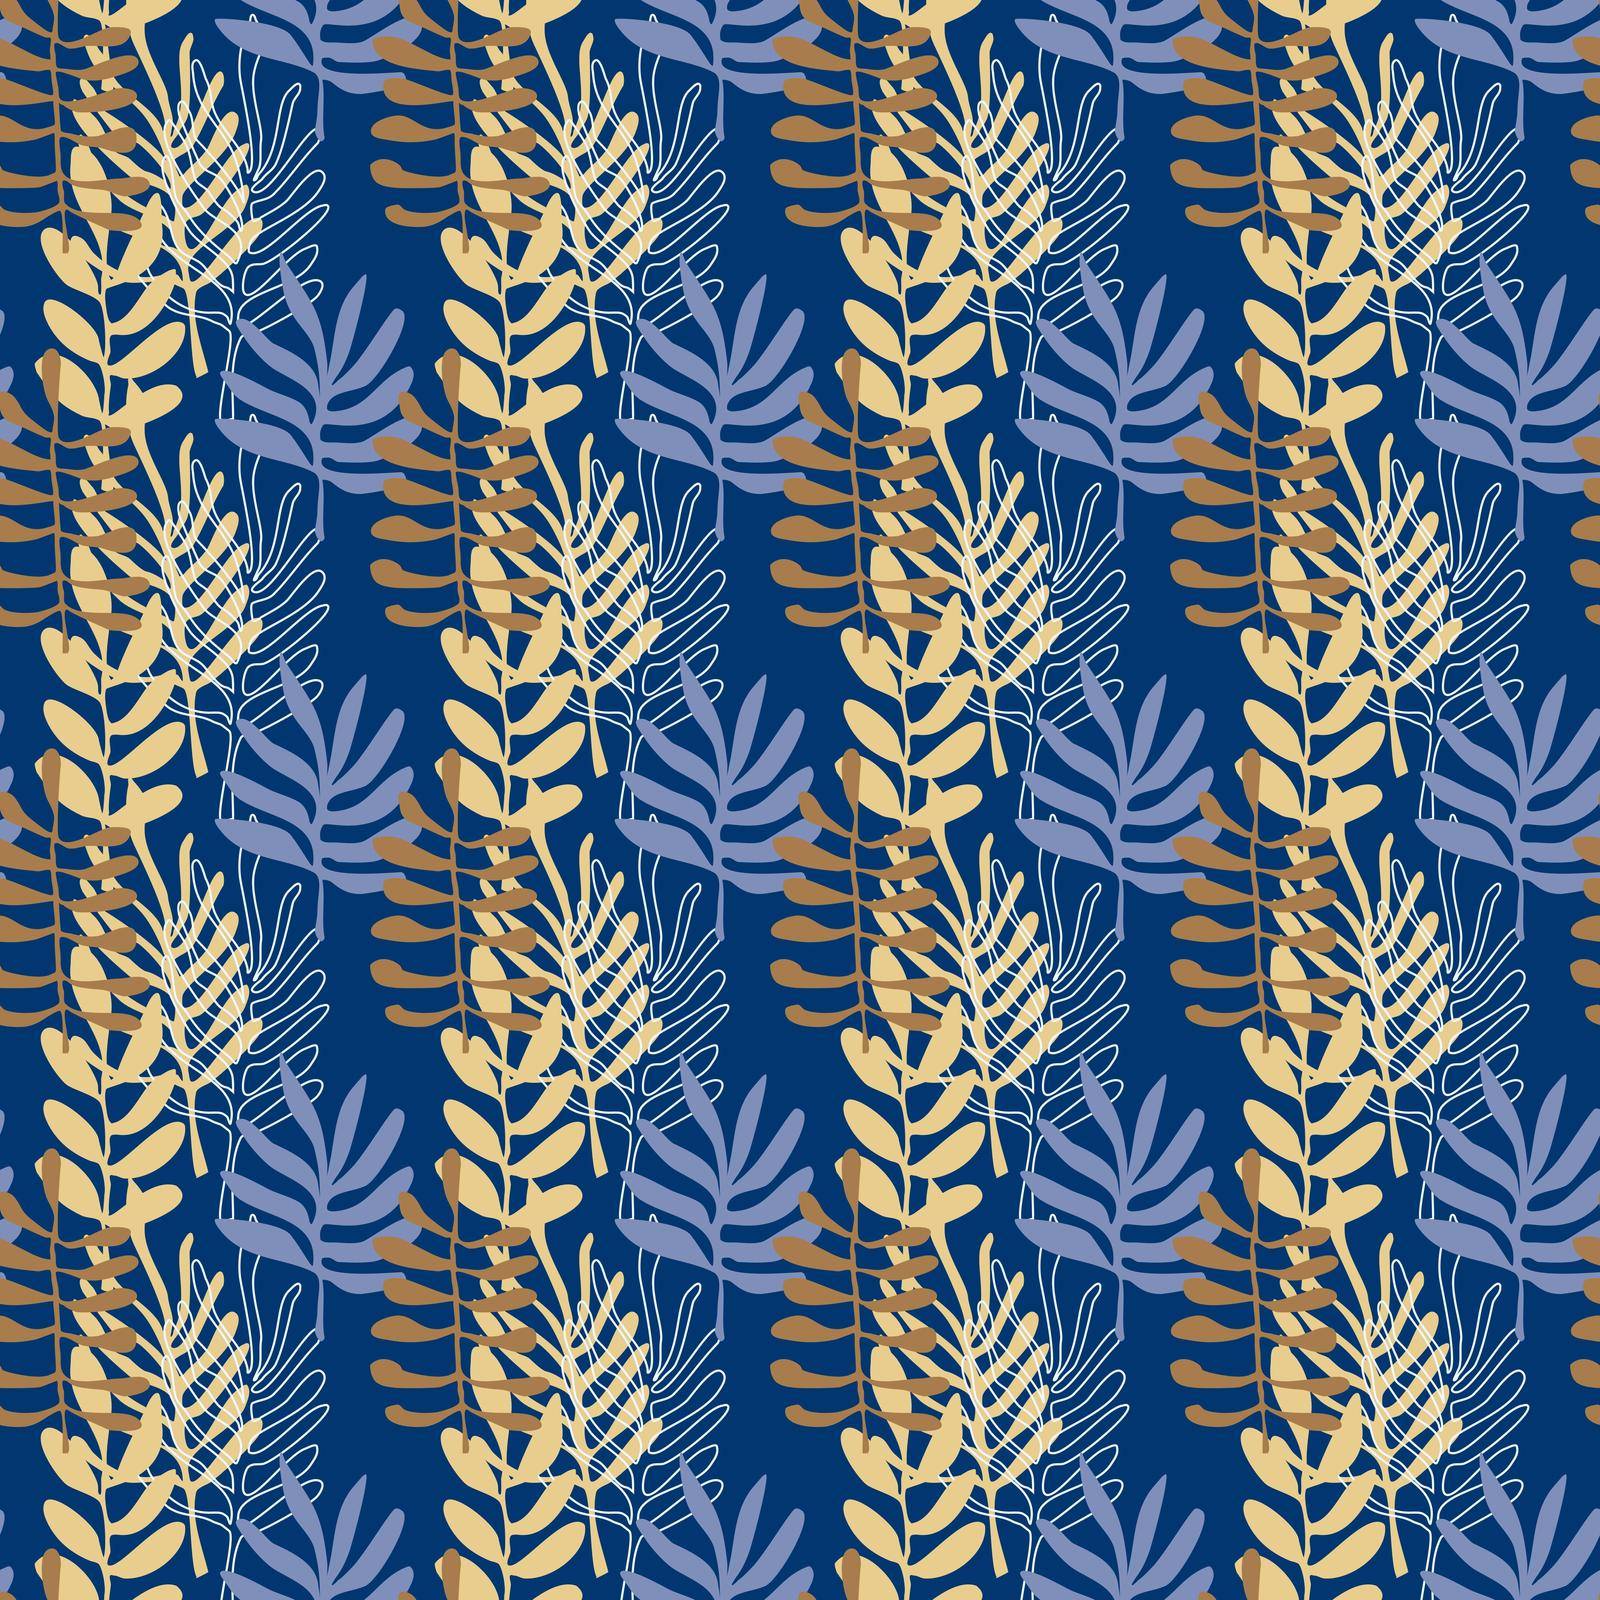 Seamless pattern for textile and wallpapers with naive hand drawn doodle leaves. Matisse style organic elements. Vector illustration